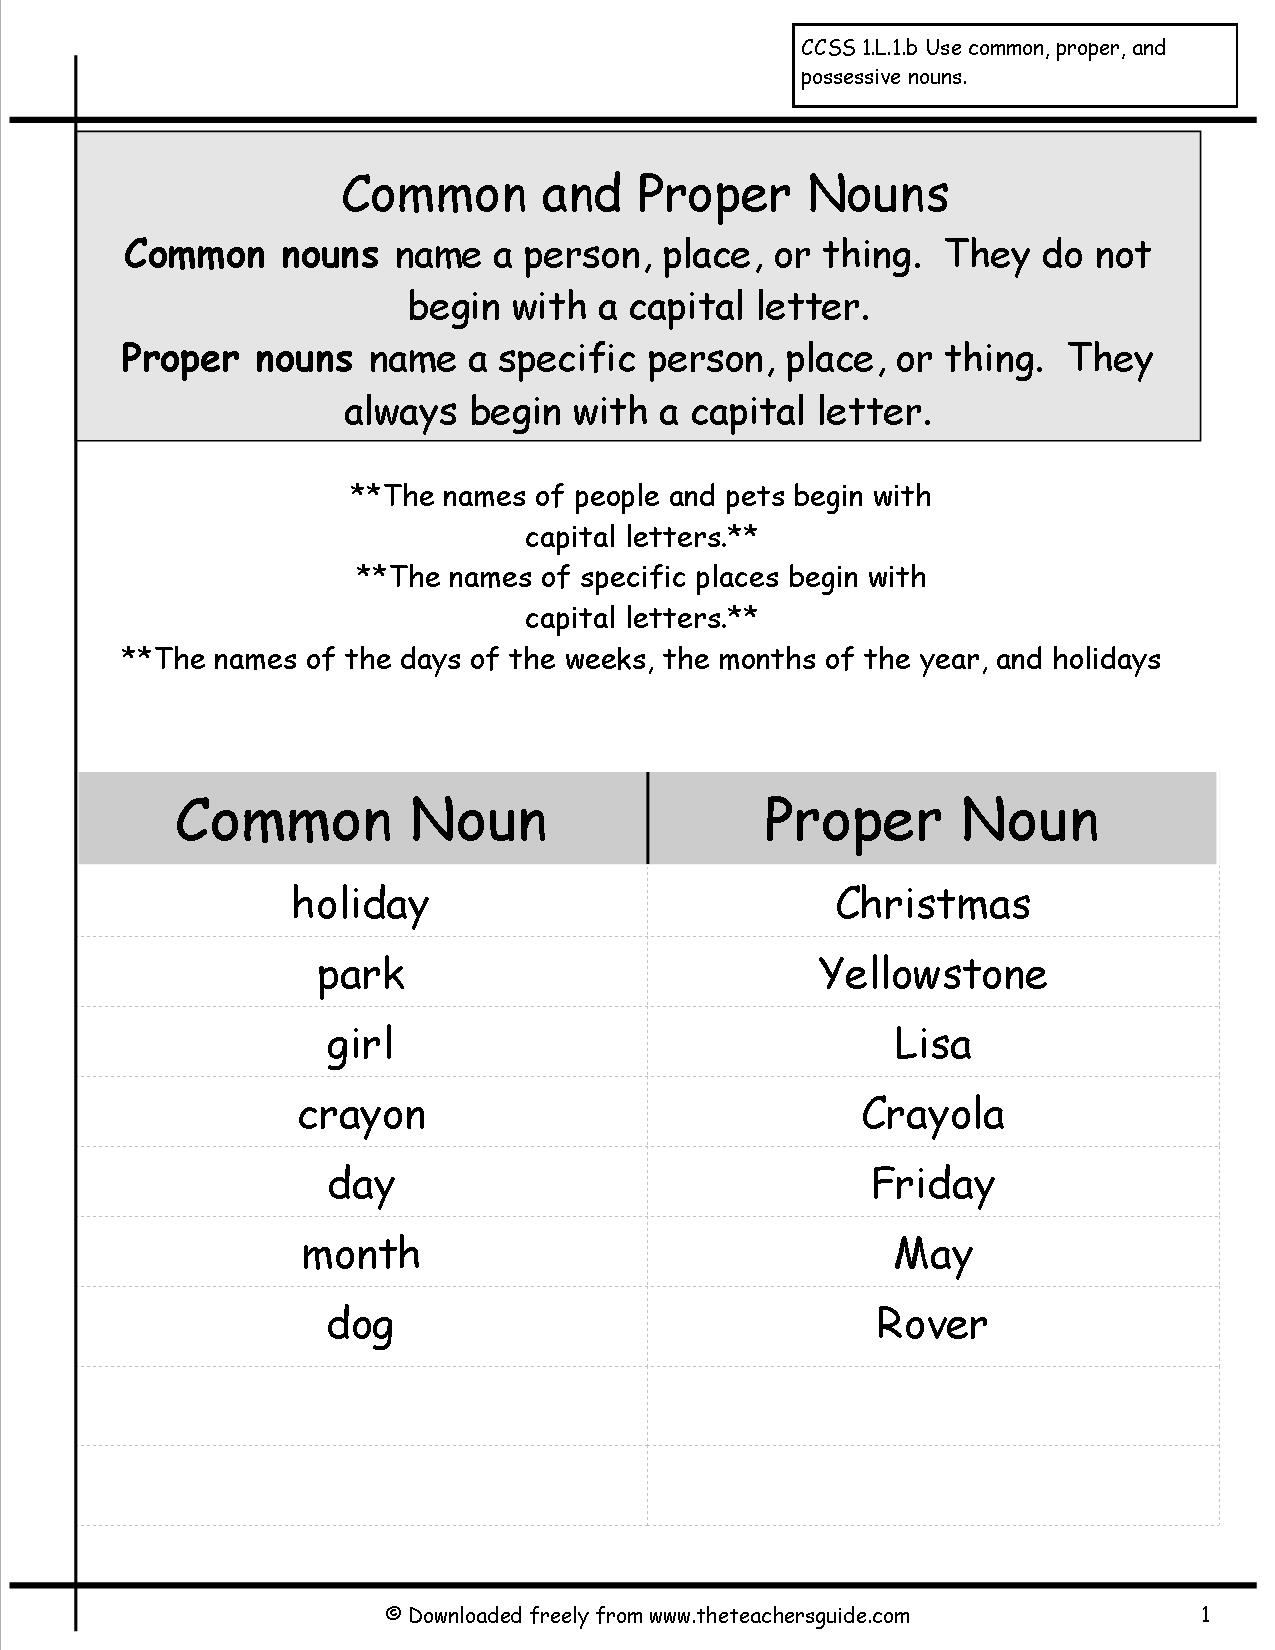 Worksheet About Common And Proper Nouns Informational